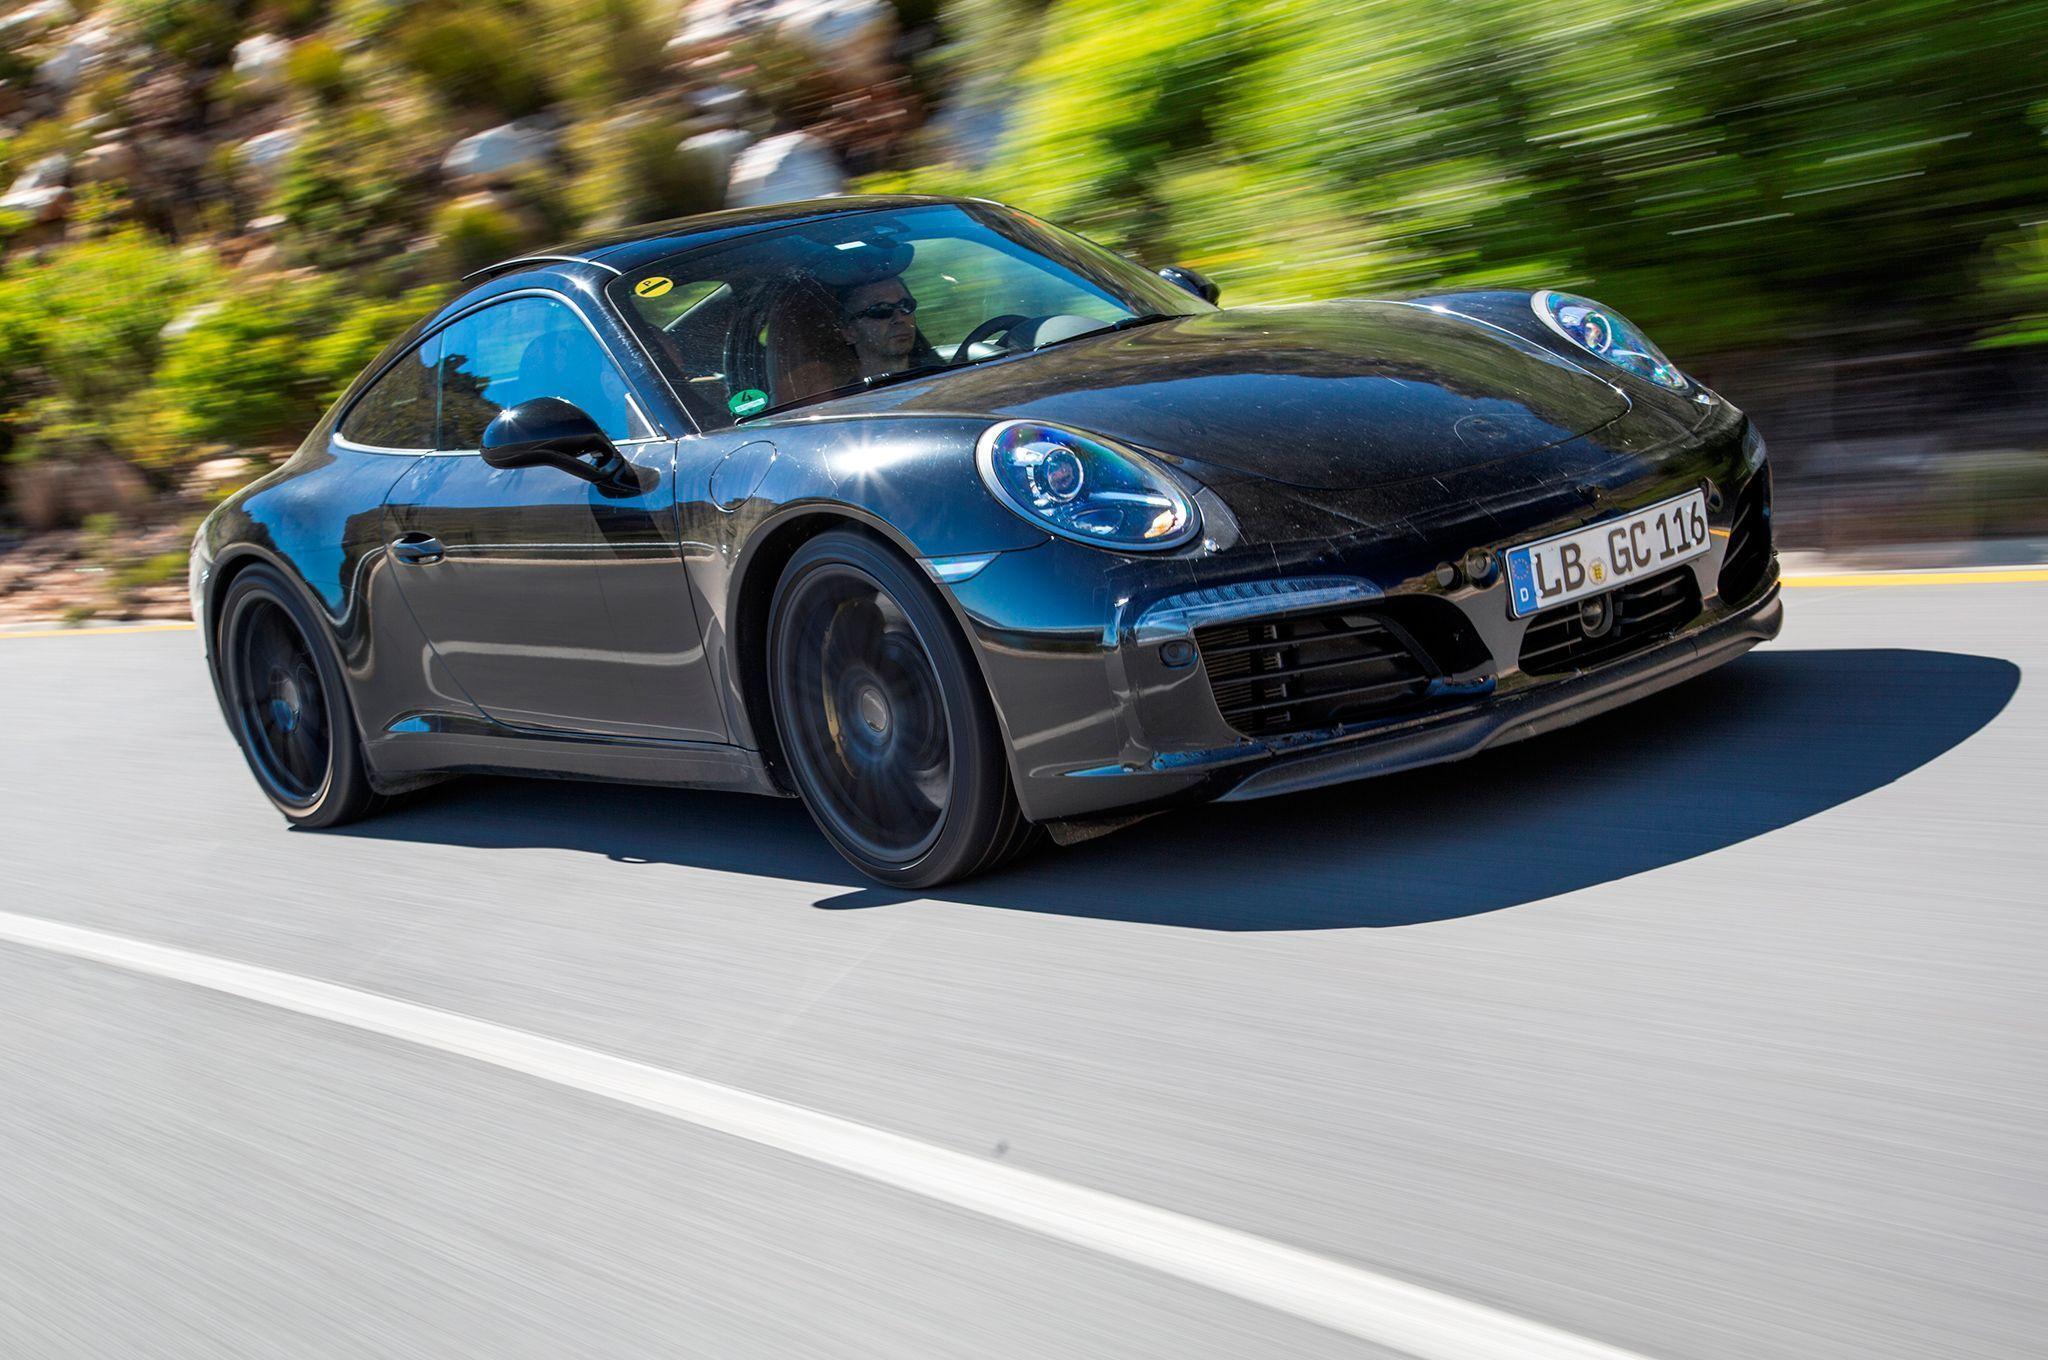 Things to Know about the 2017 Porsche 911